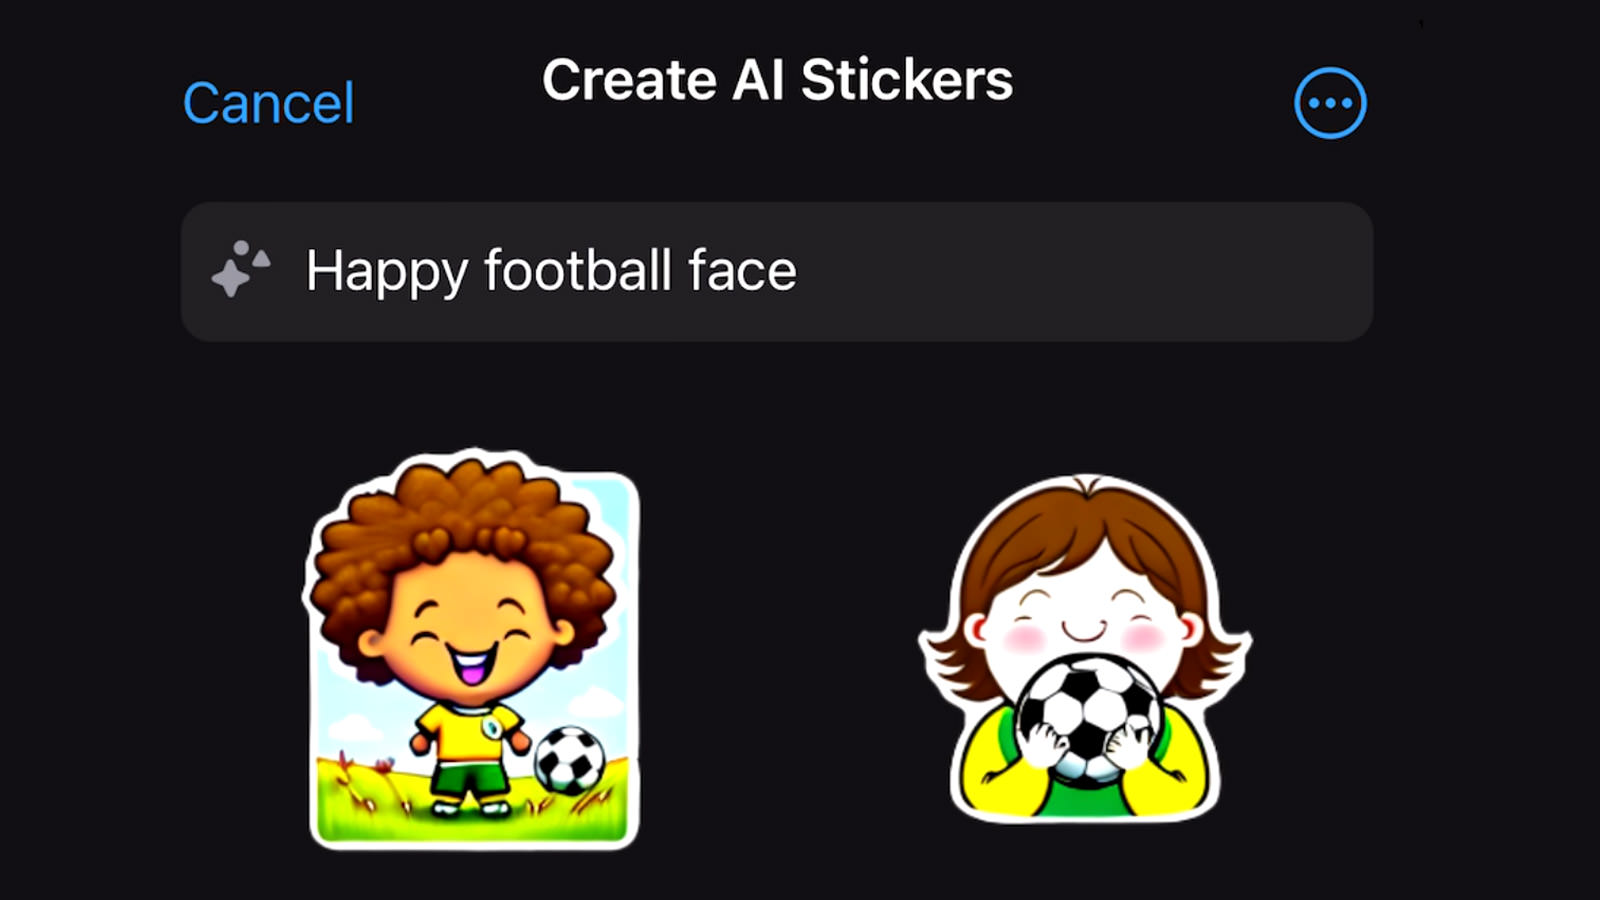 AI stickers feature in WhatsApp